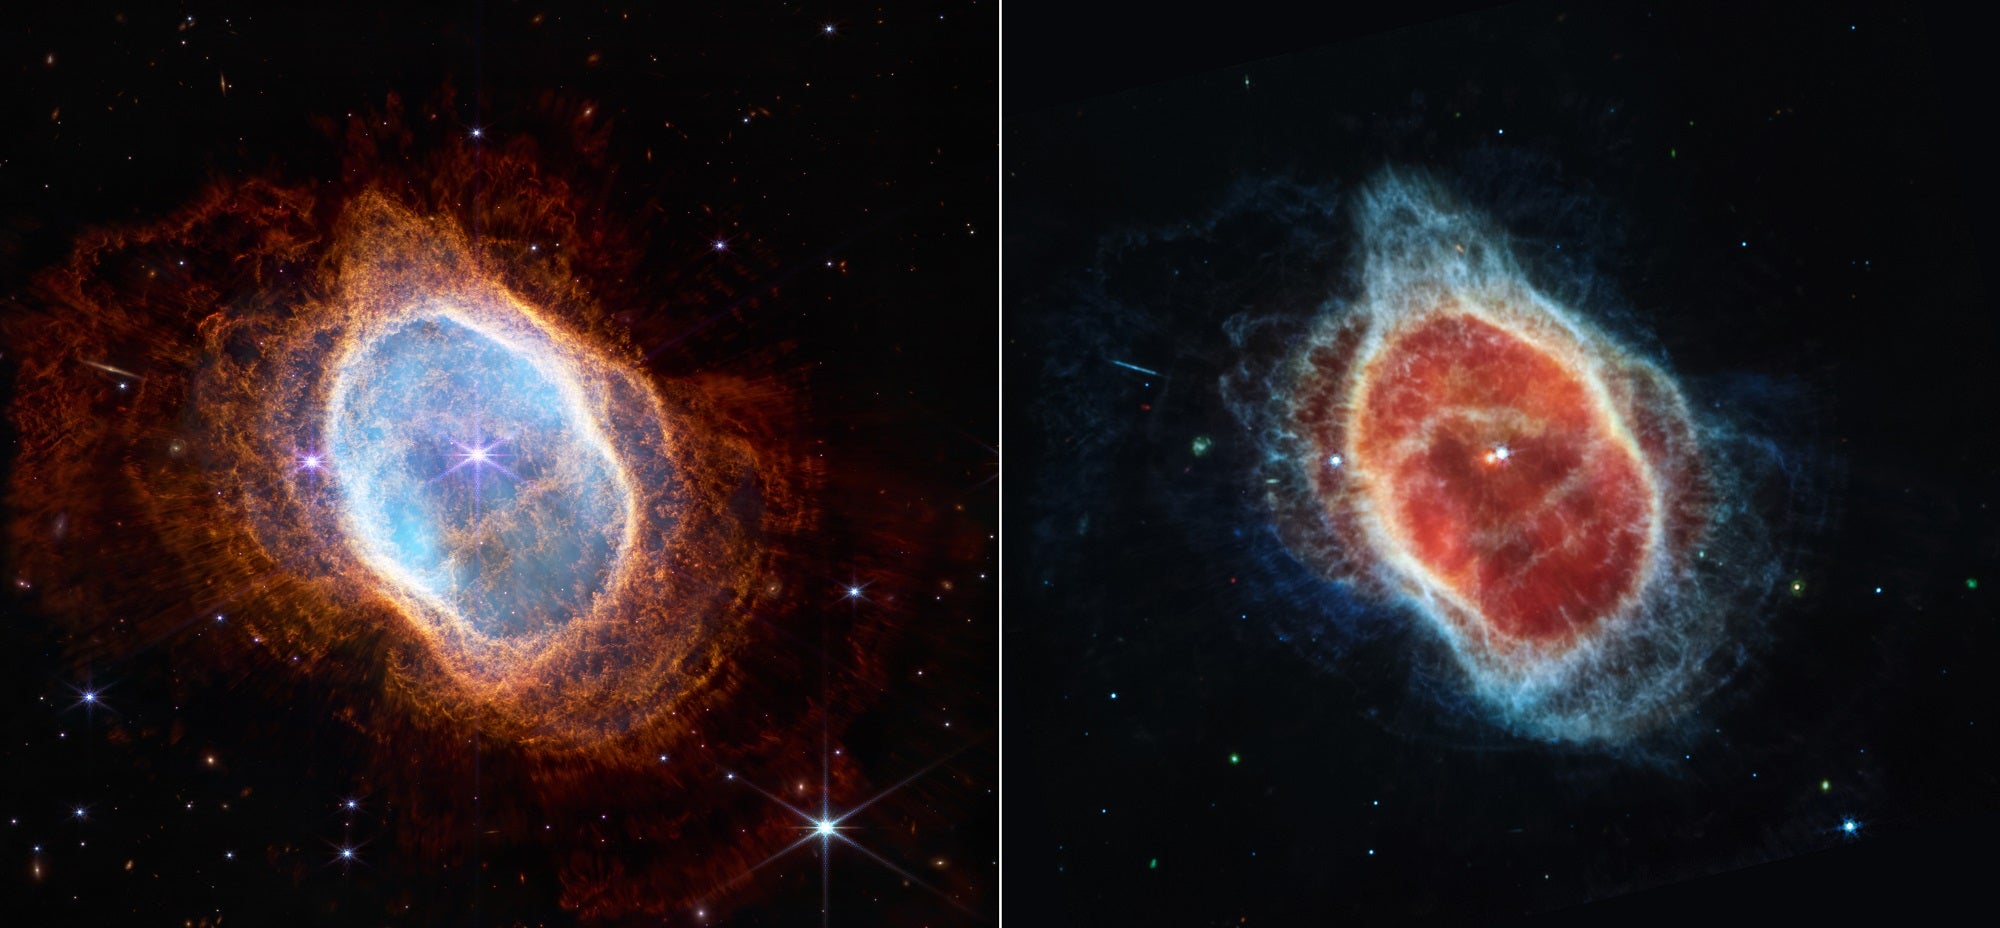 Two James Webb Space Telescope views of Southern Ring Nebula in red and blue